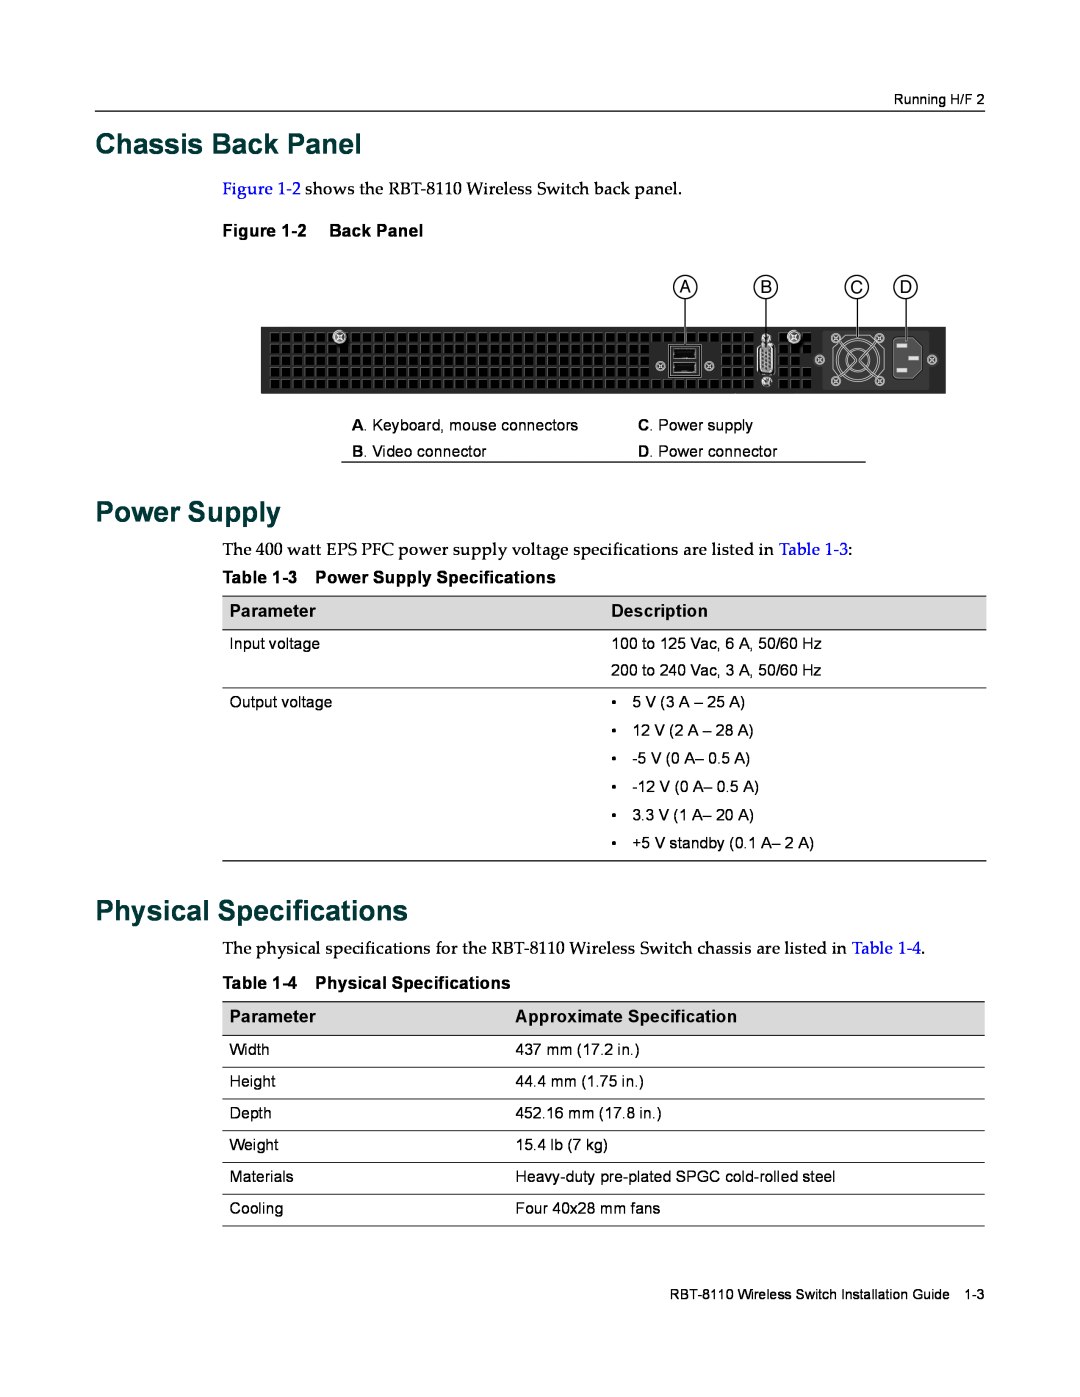 Enterasys Networks RBT-8110 manual Chassis Back Panel, Power Supply, Physical Specifications, 2 Back Panel, Parameter 